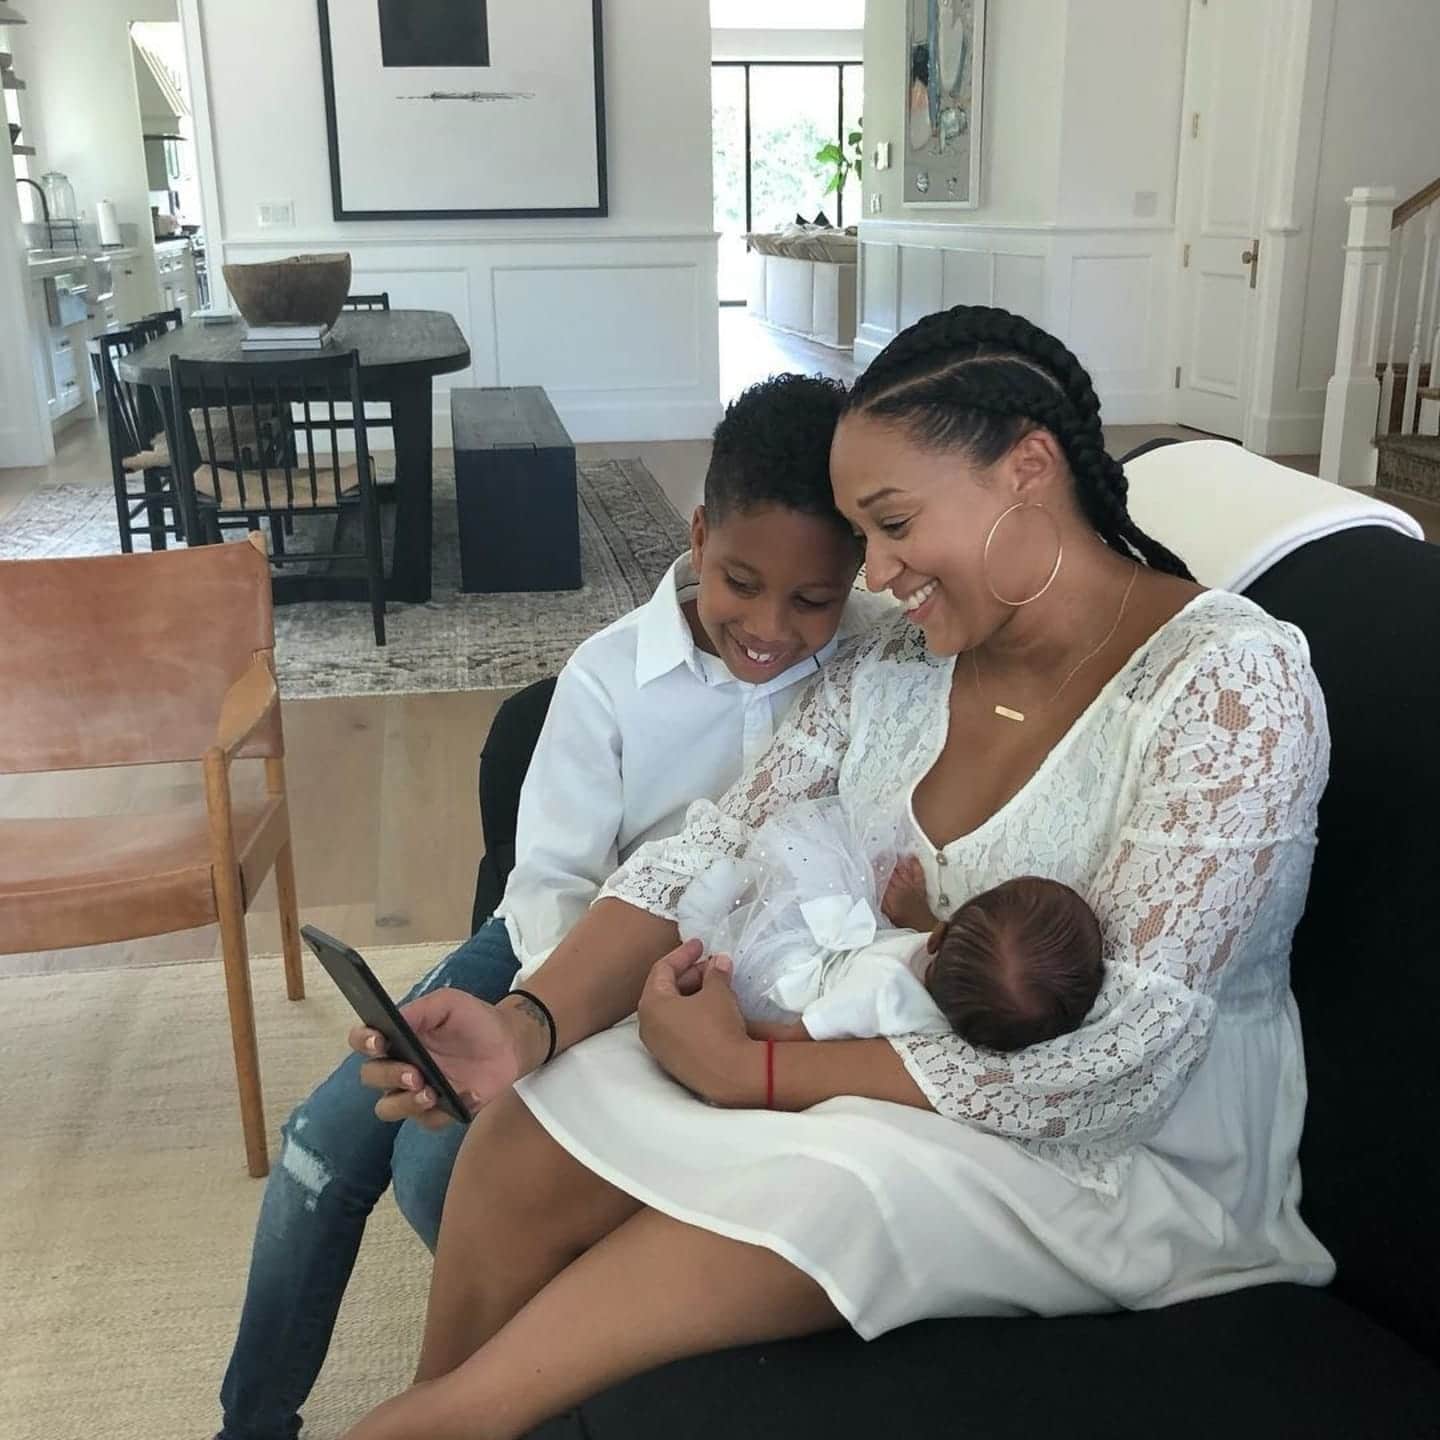 Tia Mowry sitting with her child and carrying her baby